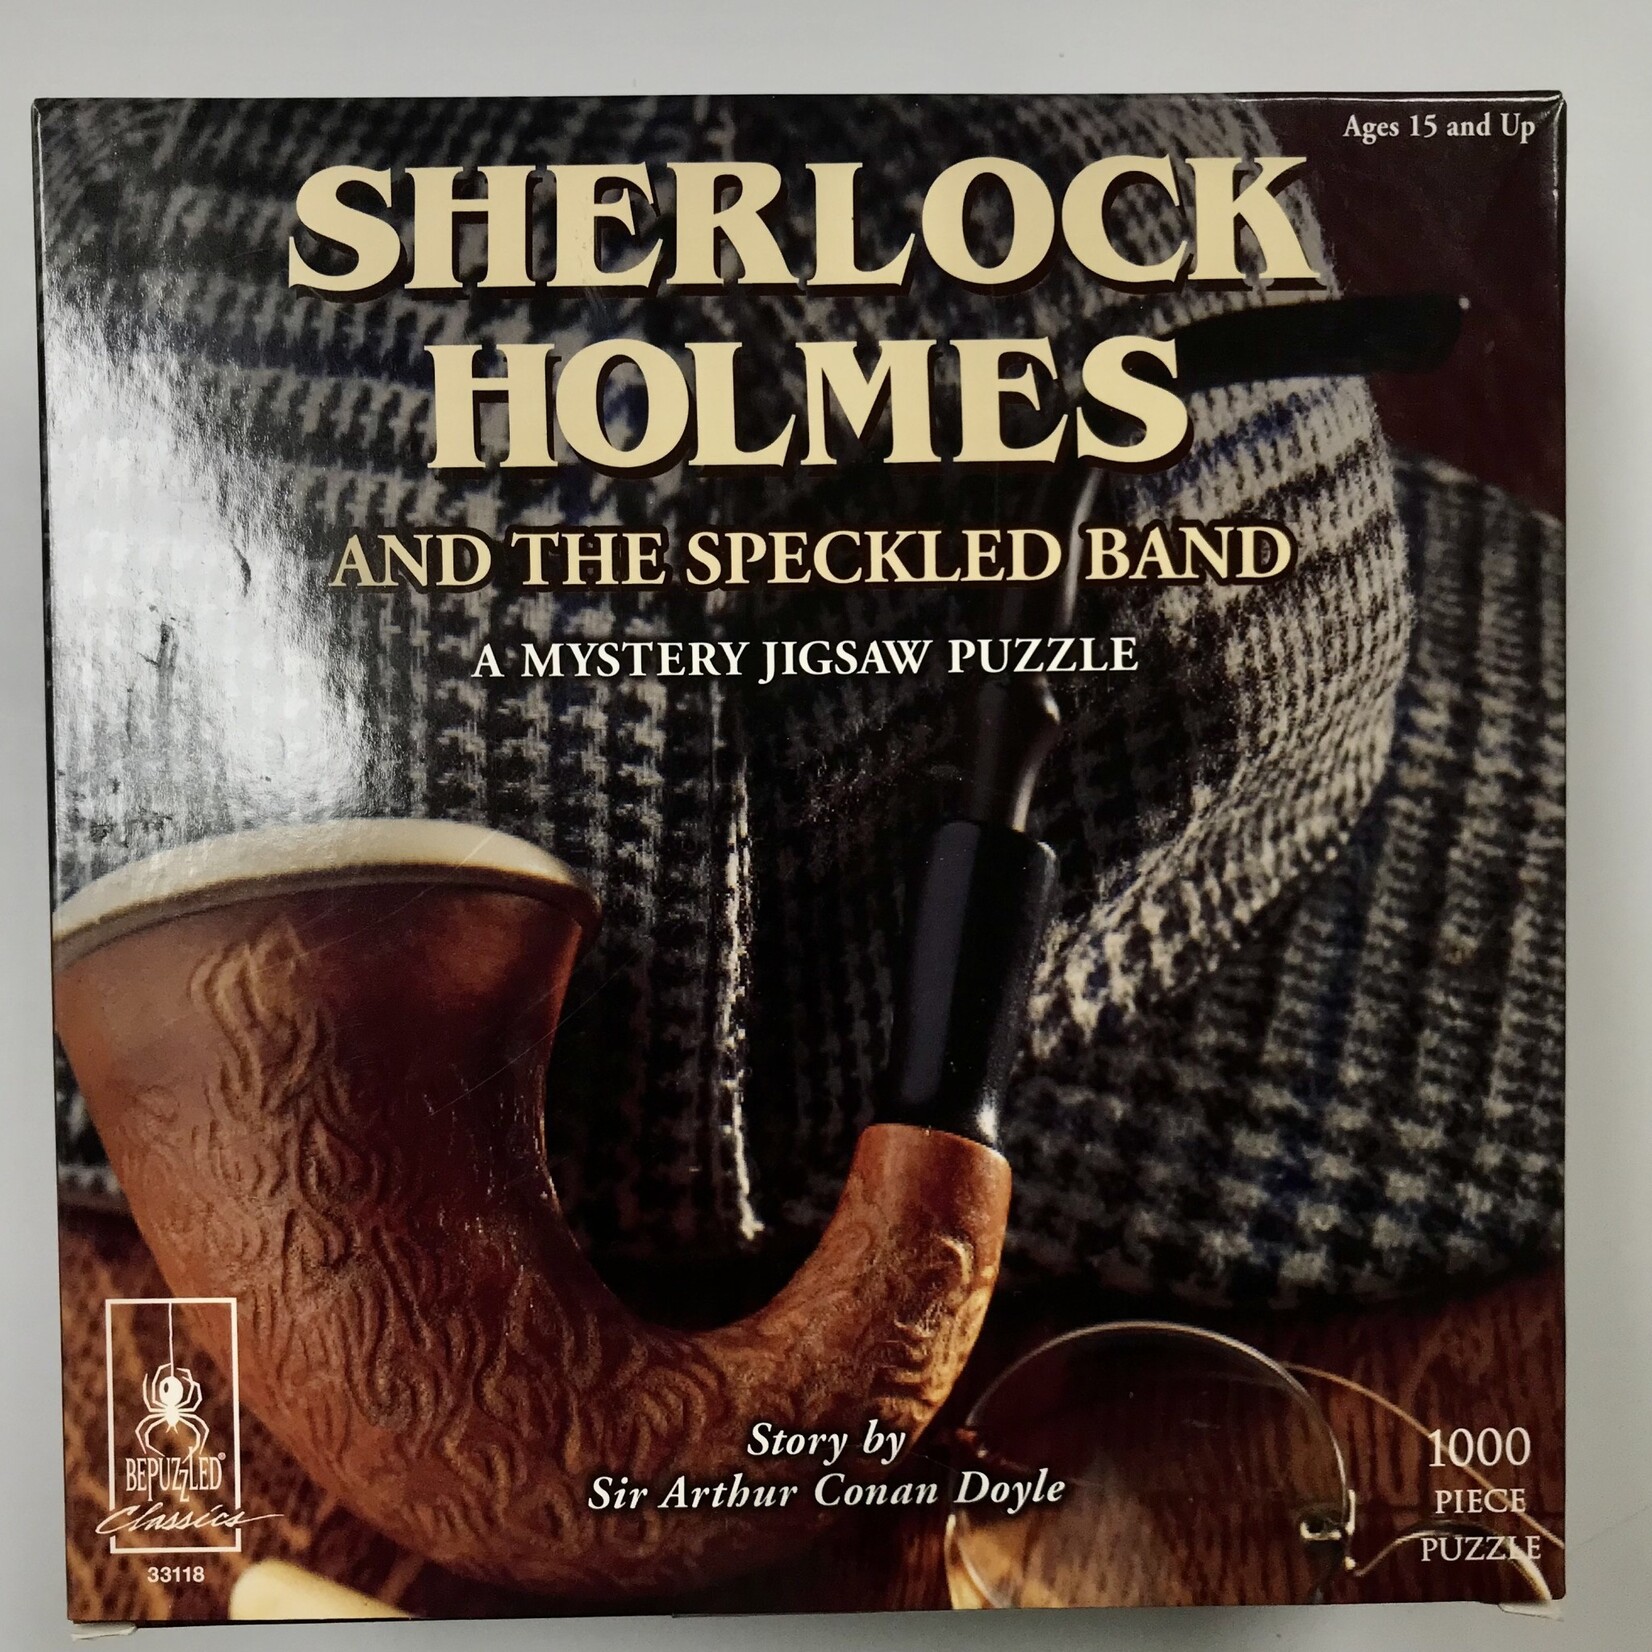 Sherlock Holmes And The Speckled Band - 1000-Piece Jigsaw Puzzle (NEW)